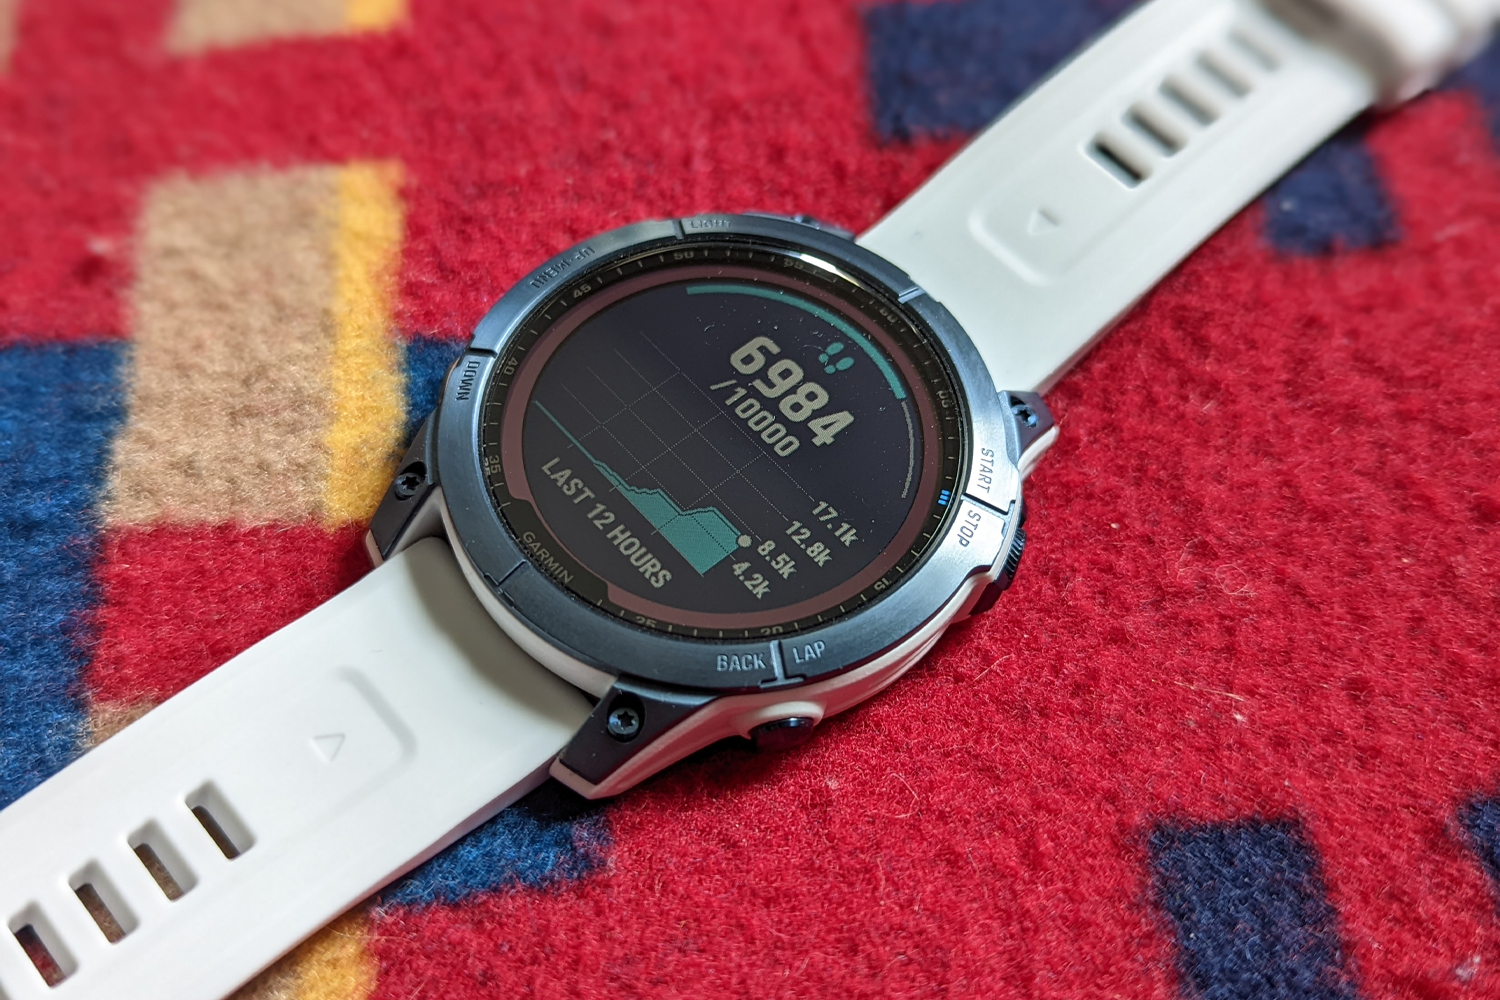 The Fenix 7 Sapphire Solar tracks steps, heart rate, productivity and so much more